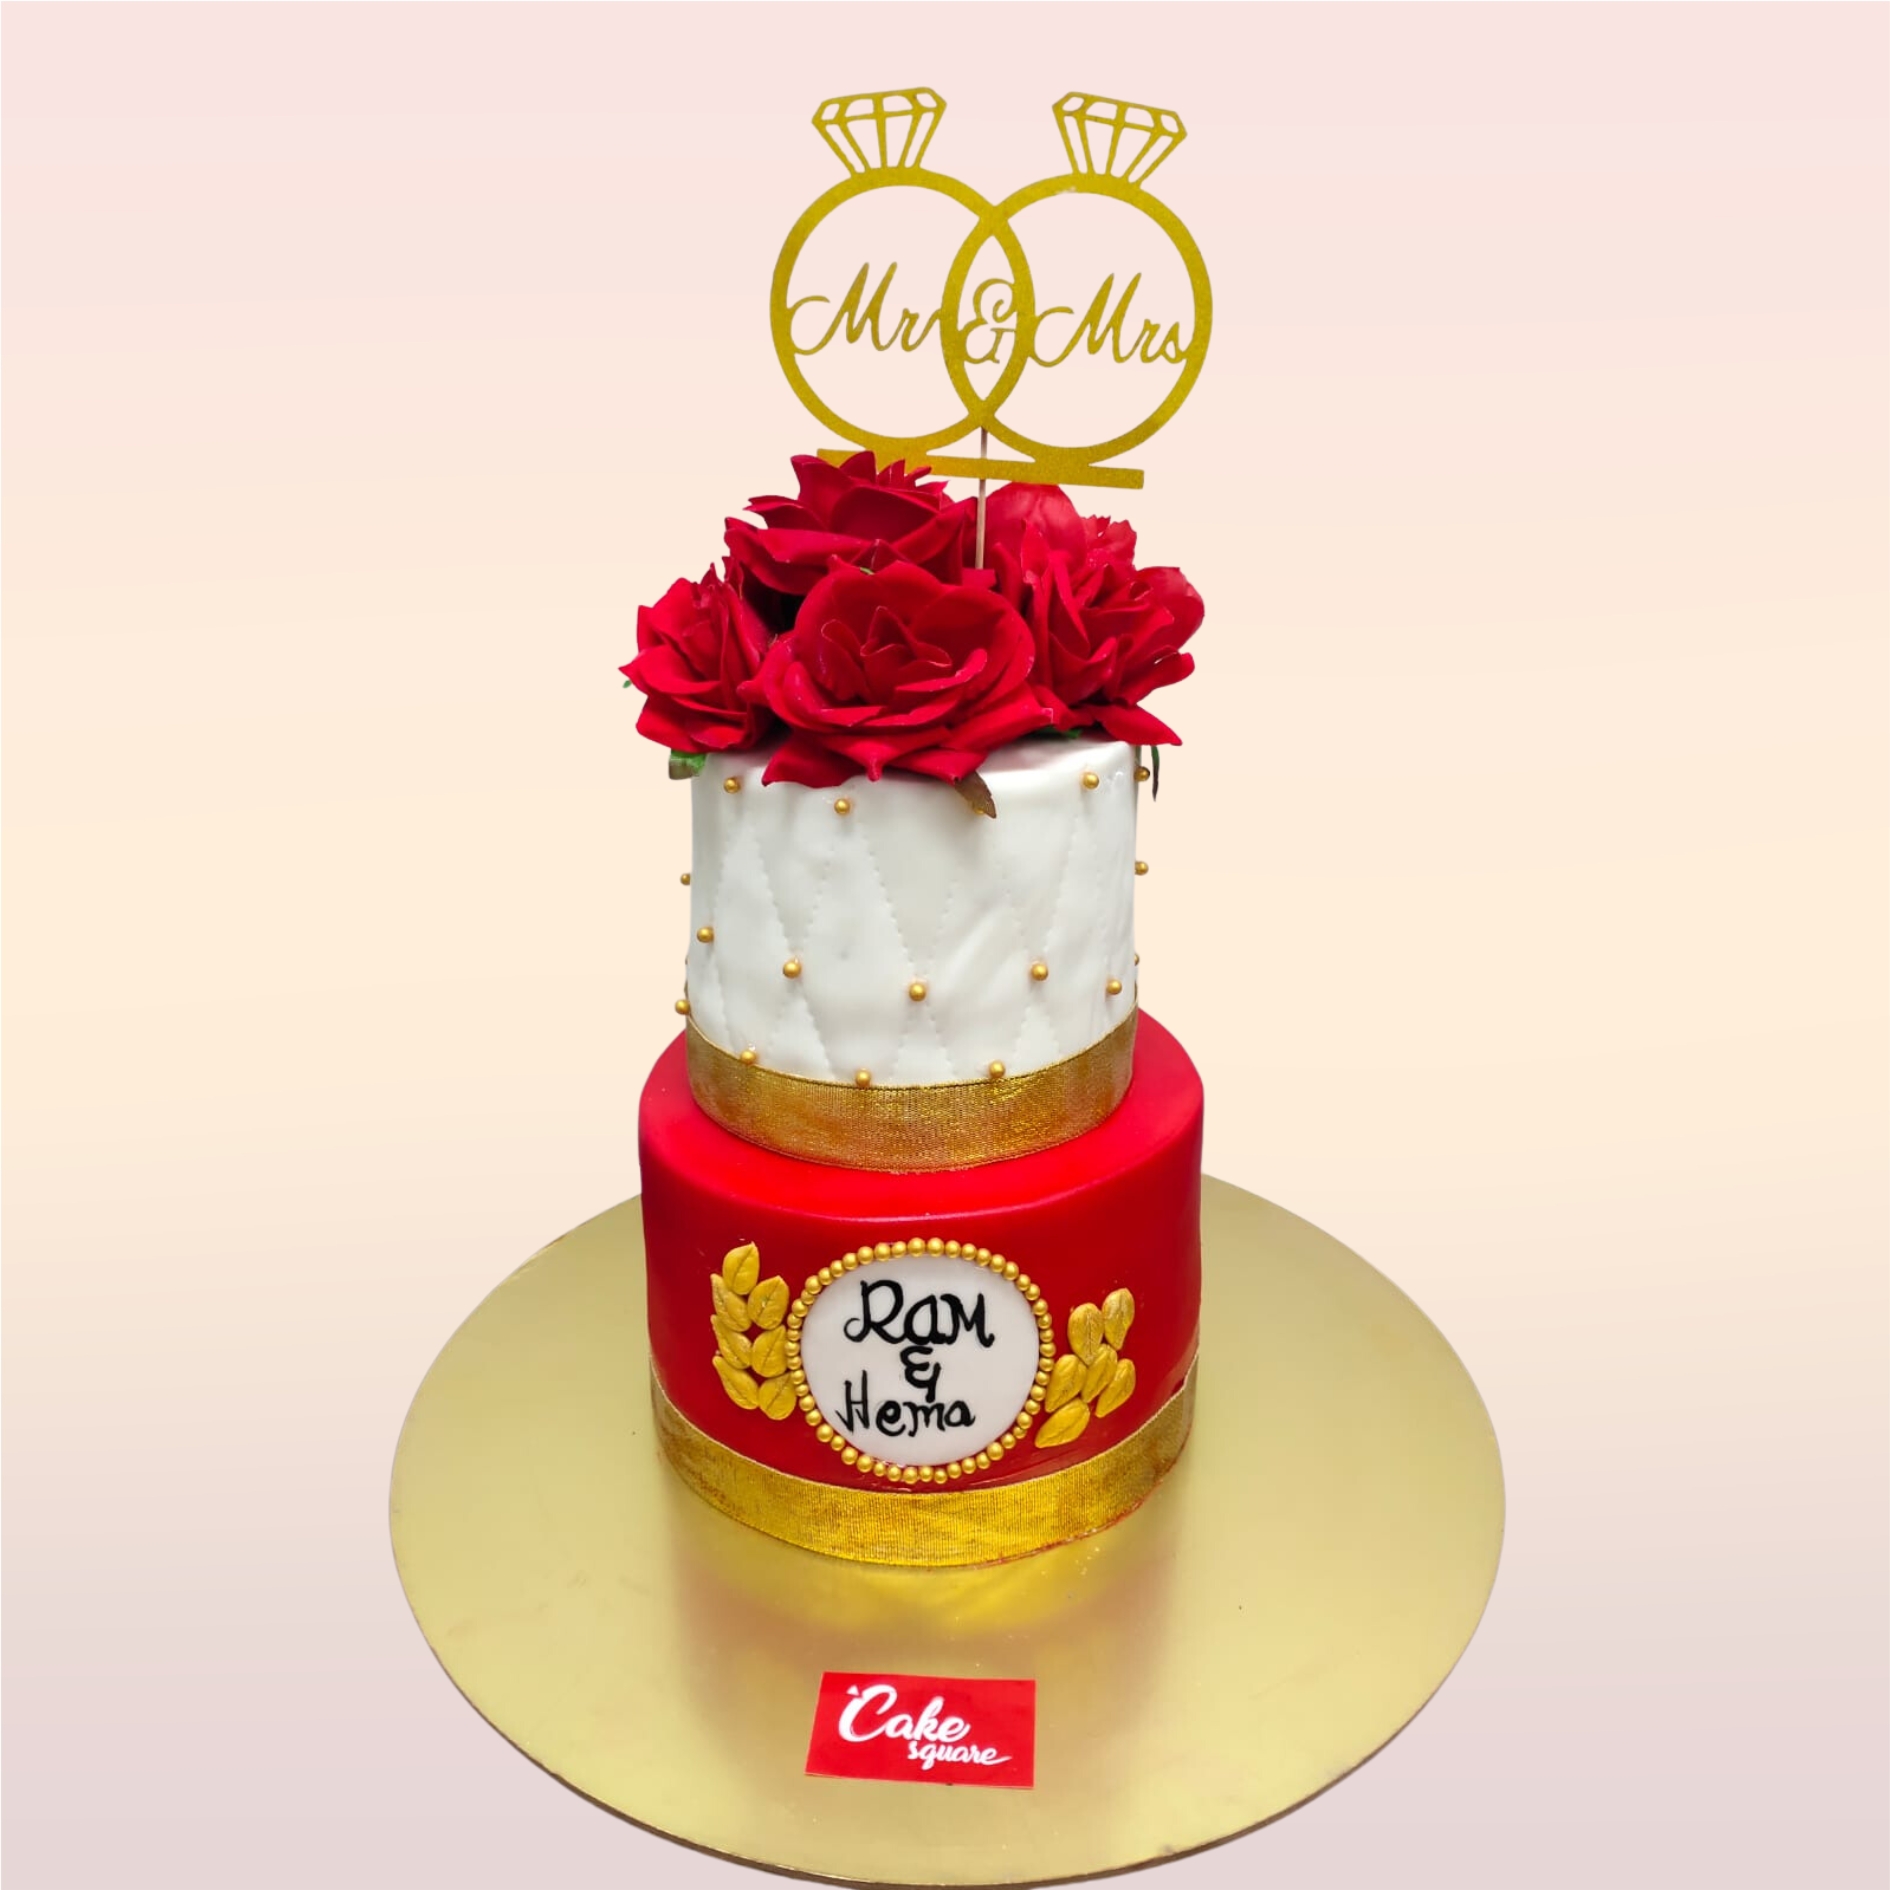 Celebrate Your Love in Style - Engagement Cakes Online Hyderabad |  CakeSmash.in - CakeSmash.in - Midnight Cake Delivery Hyderabad - Quora